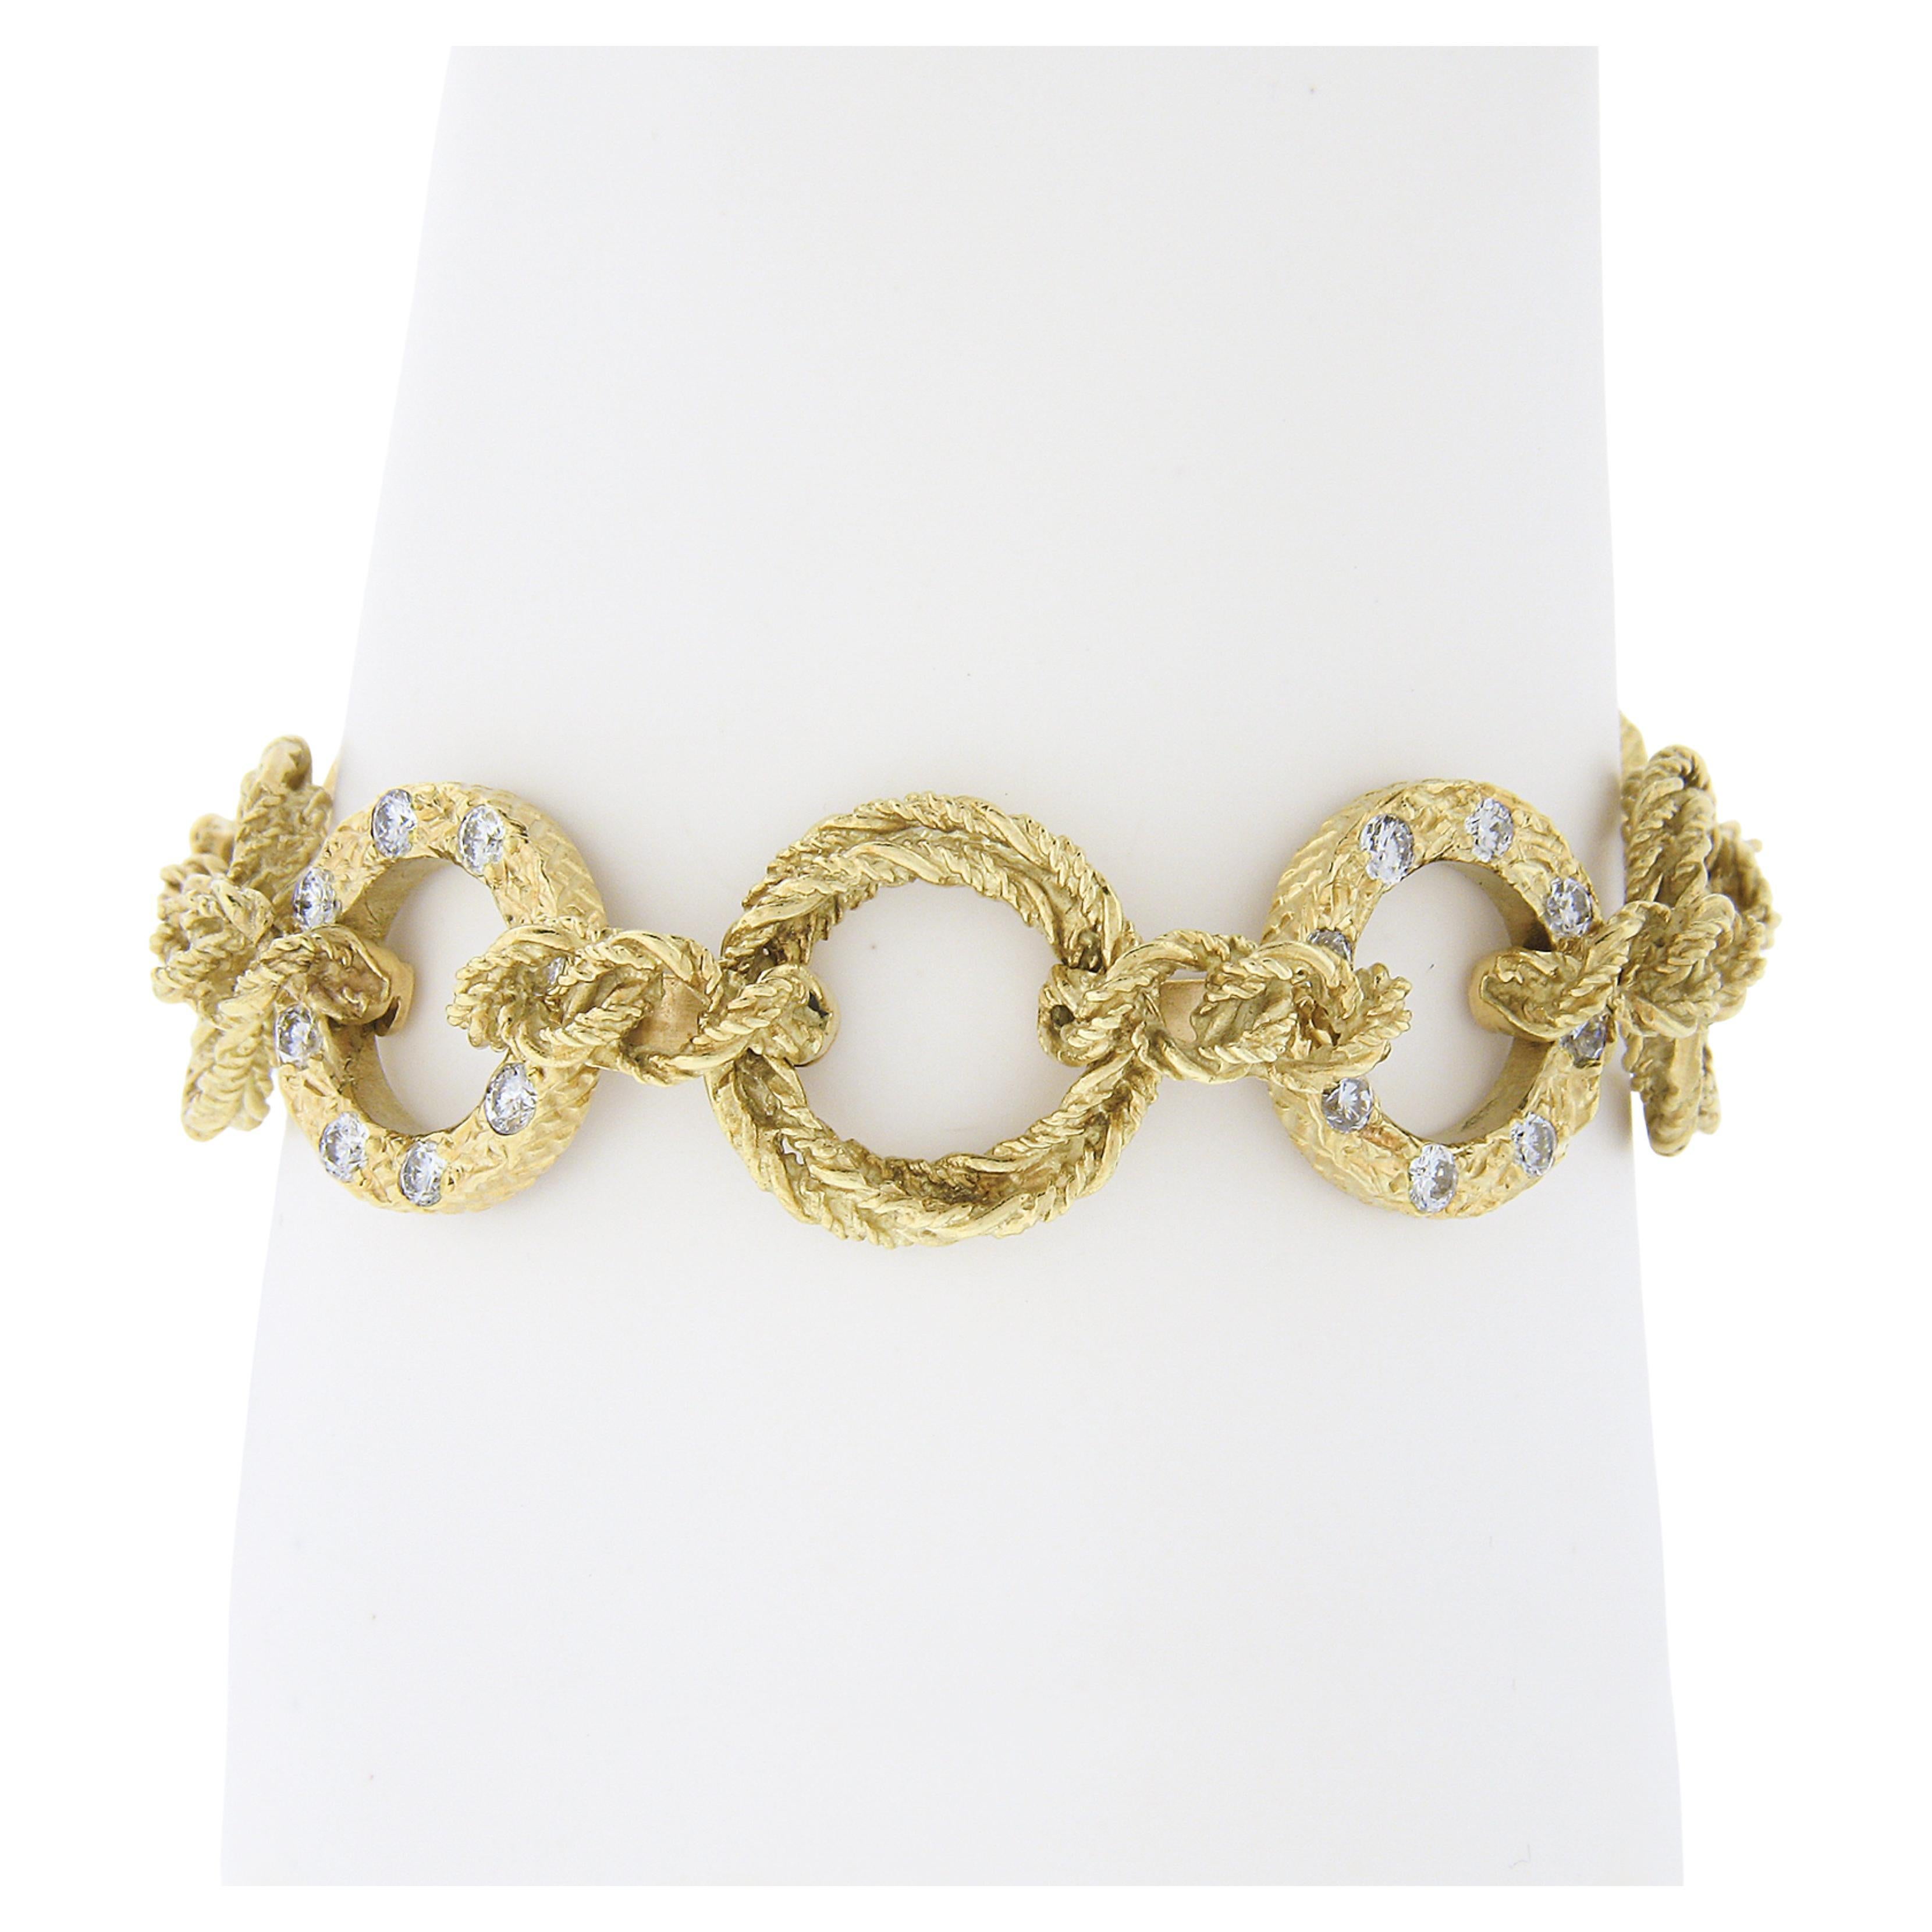 This beautiful vintage statement bracelet set was crafted from solid 18k yellow gold. These very well made bracelets feature interlocking, textured, twisted wire links throughout with a wonderful polished finish for a super attractive look. One of